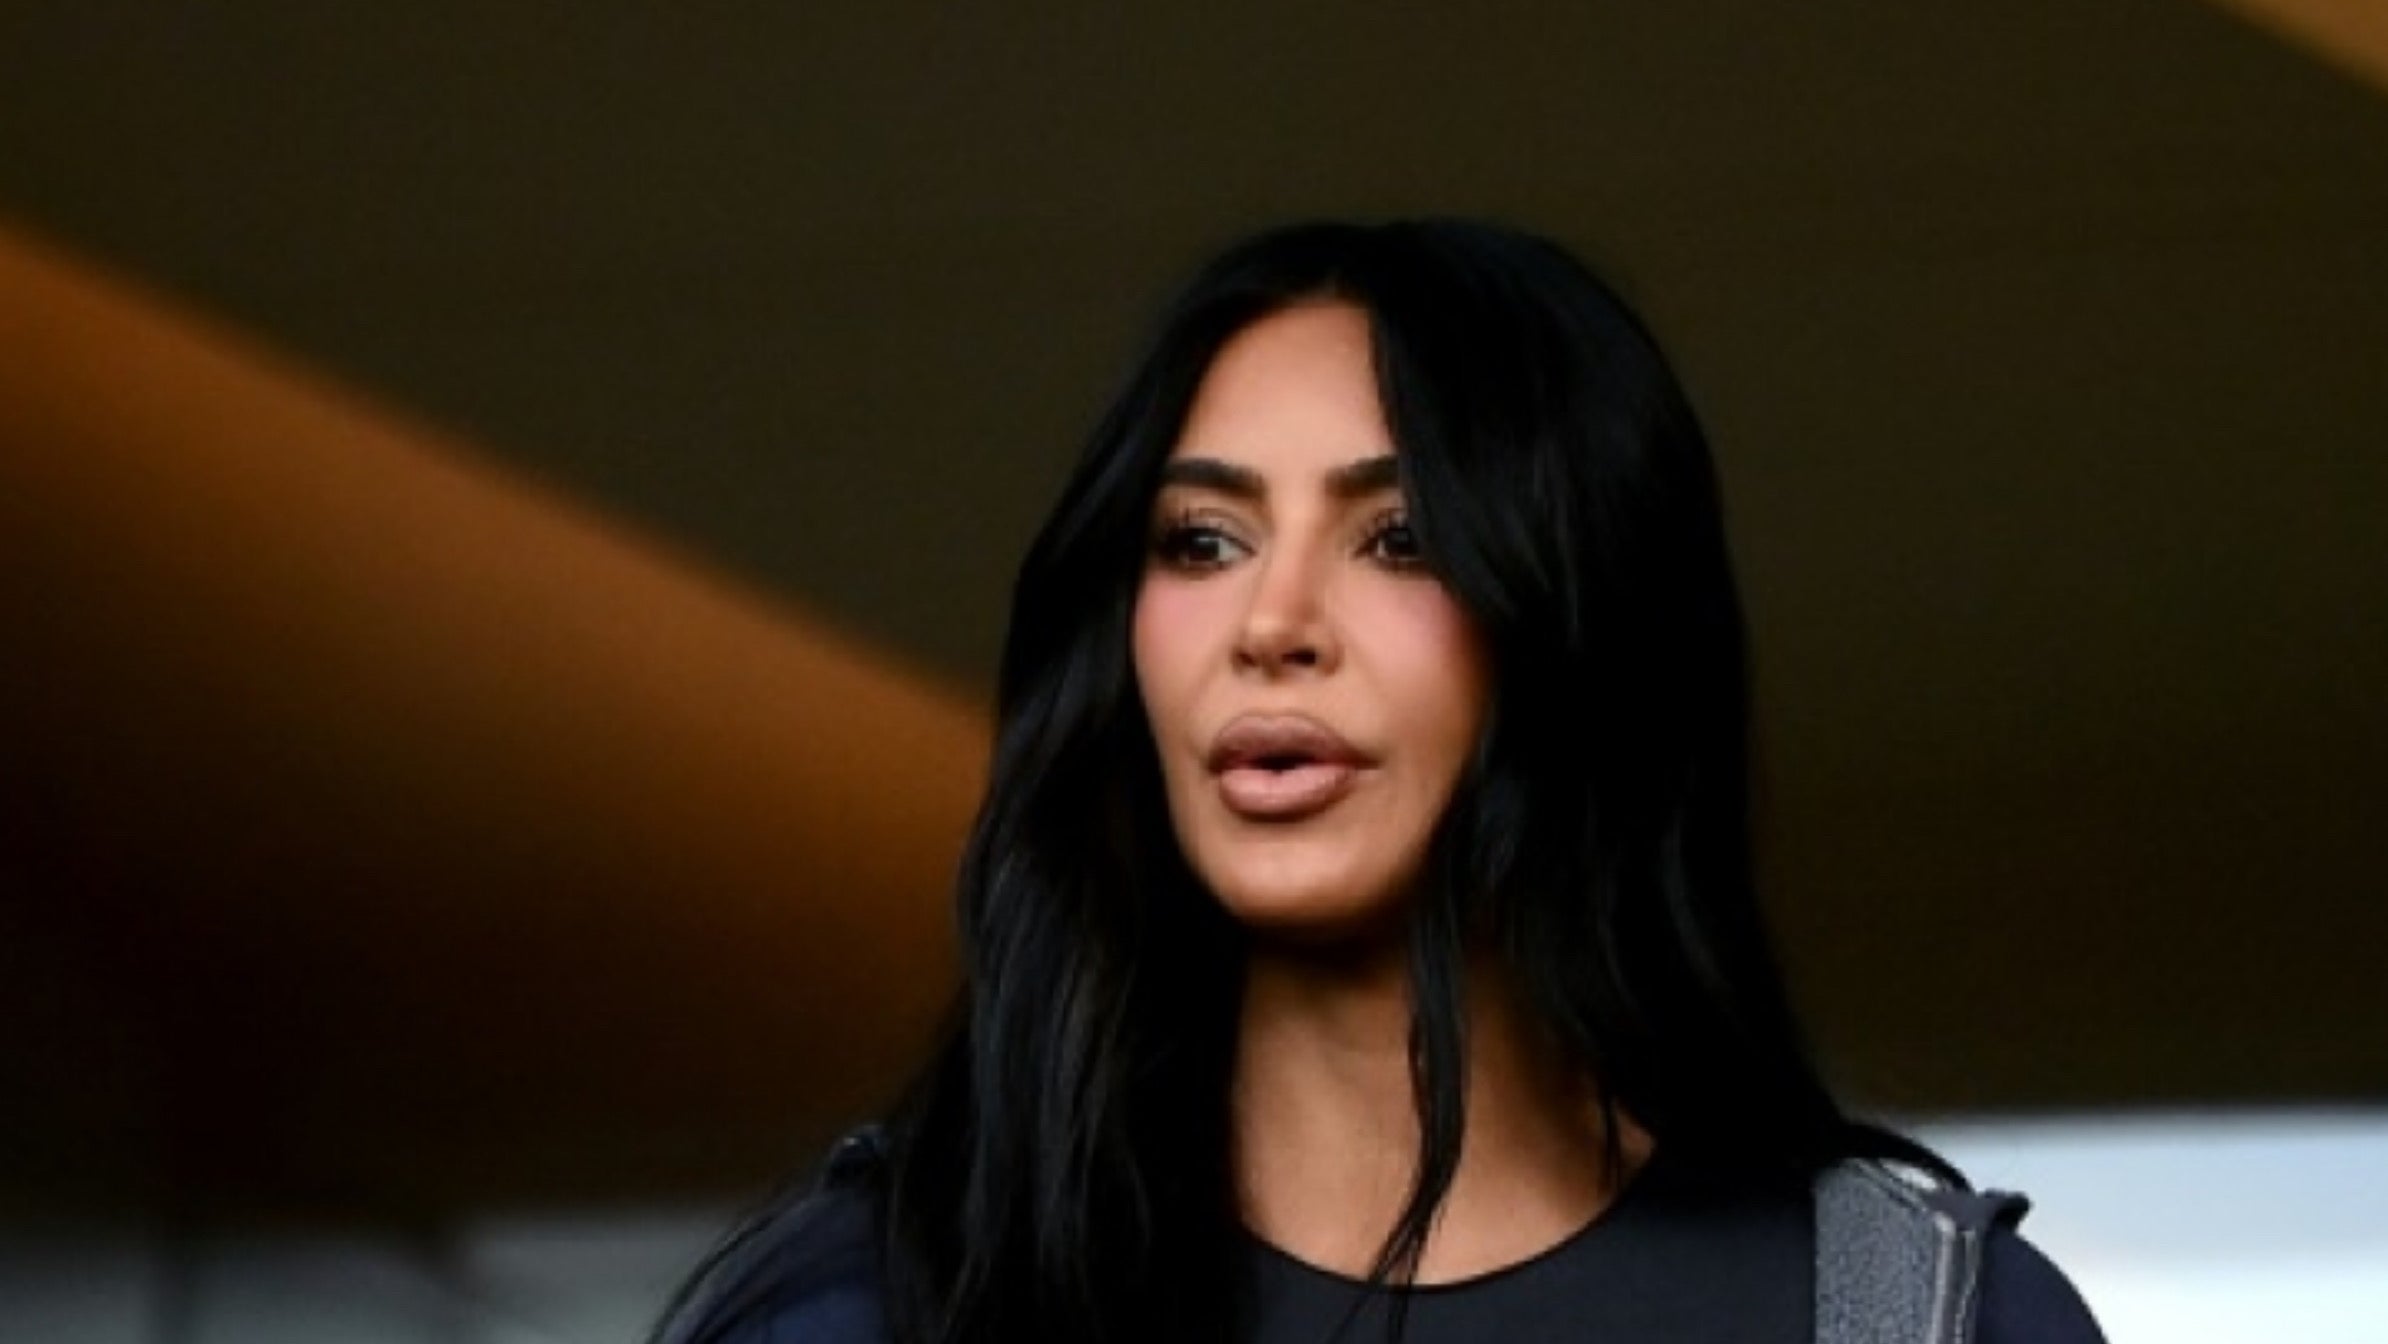 Kim Kardashian will soon play a character in &#8220;American Horror Story&#8221;: it is her first role in a series, Magnate Daily